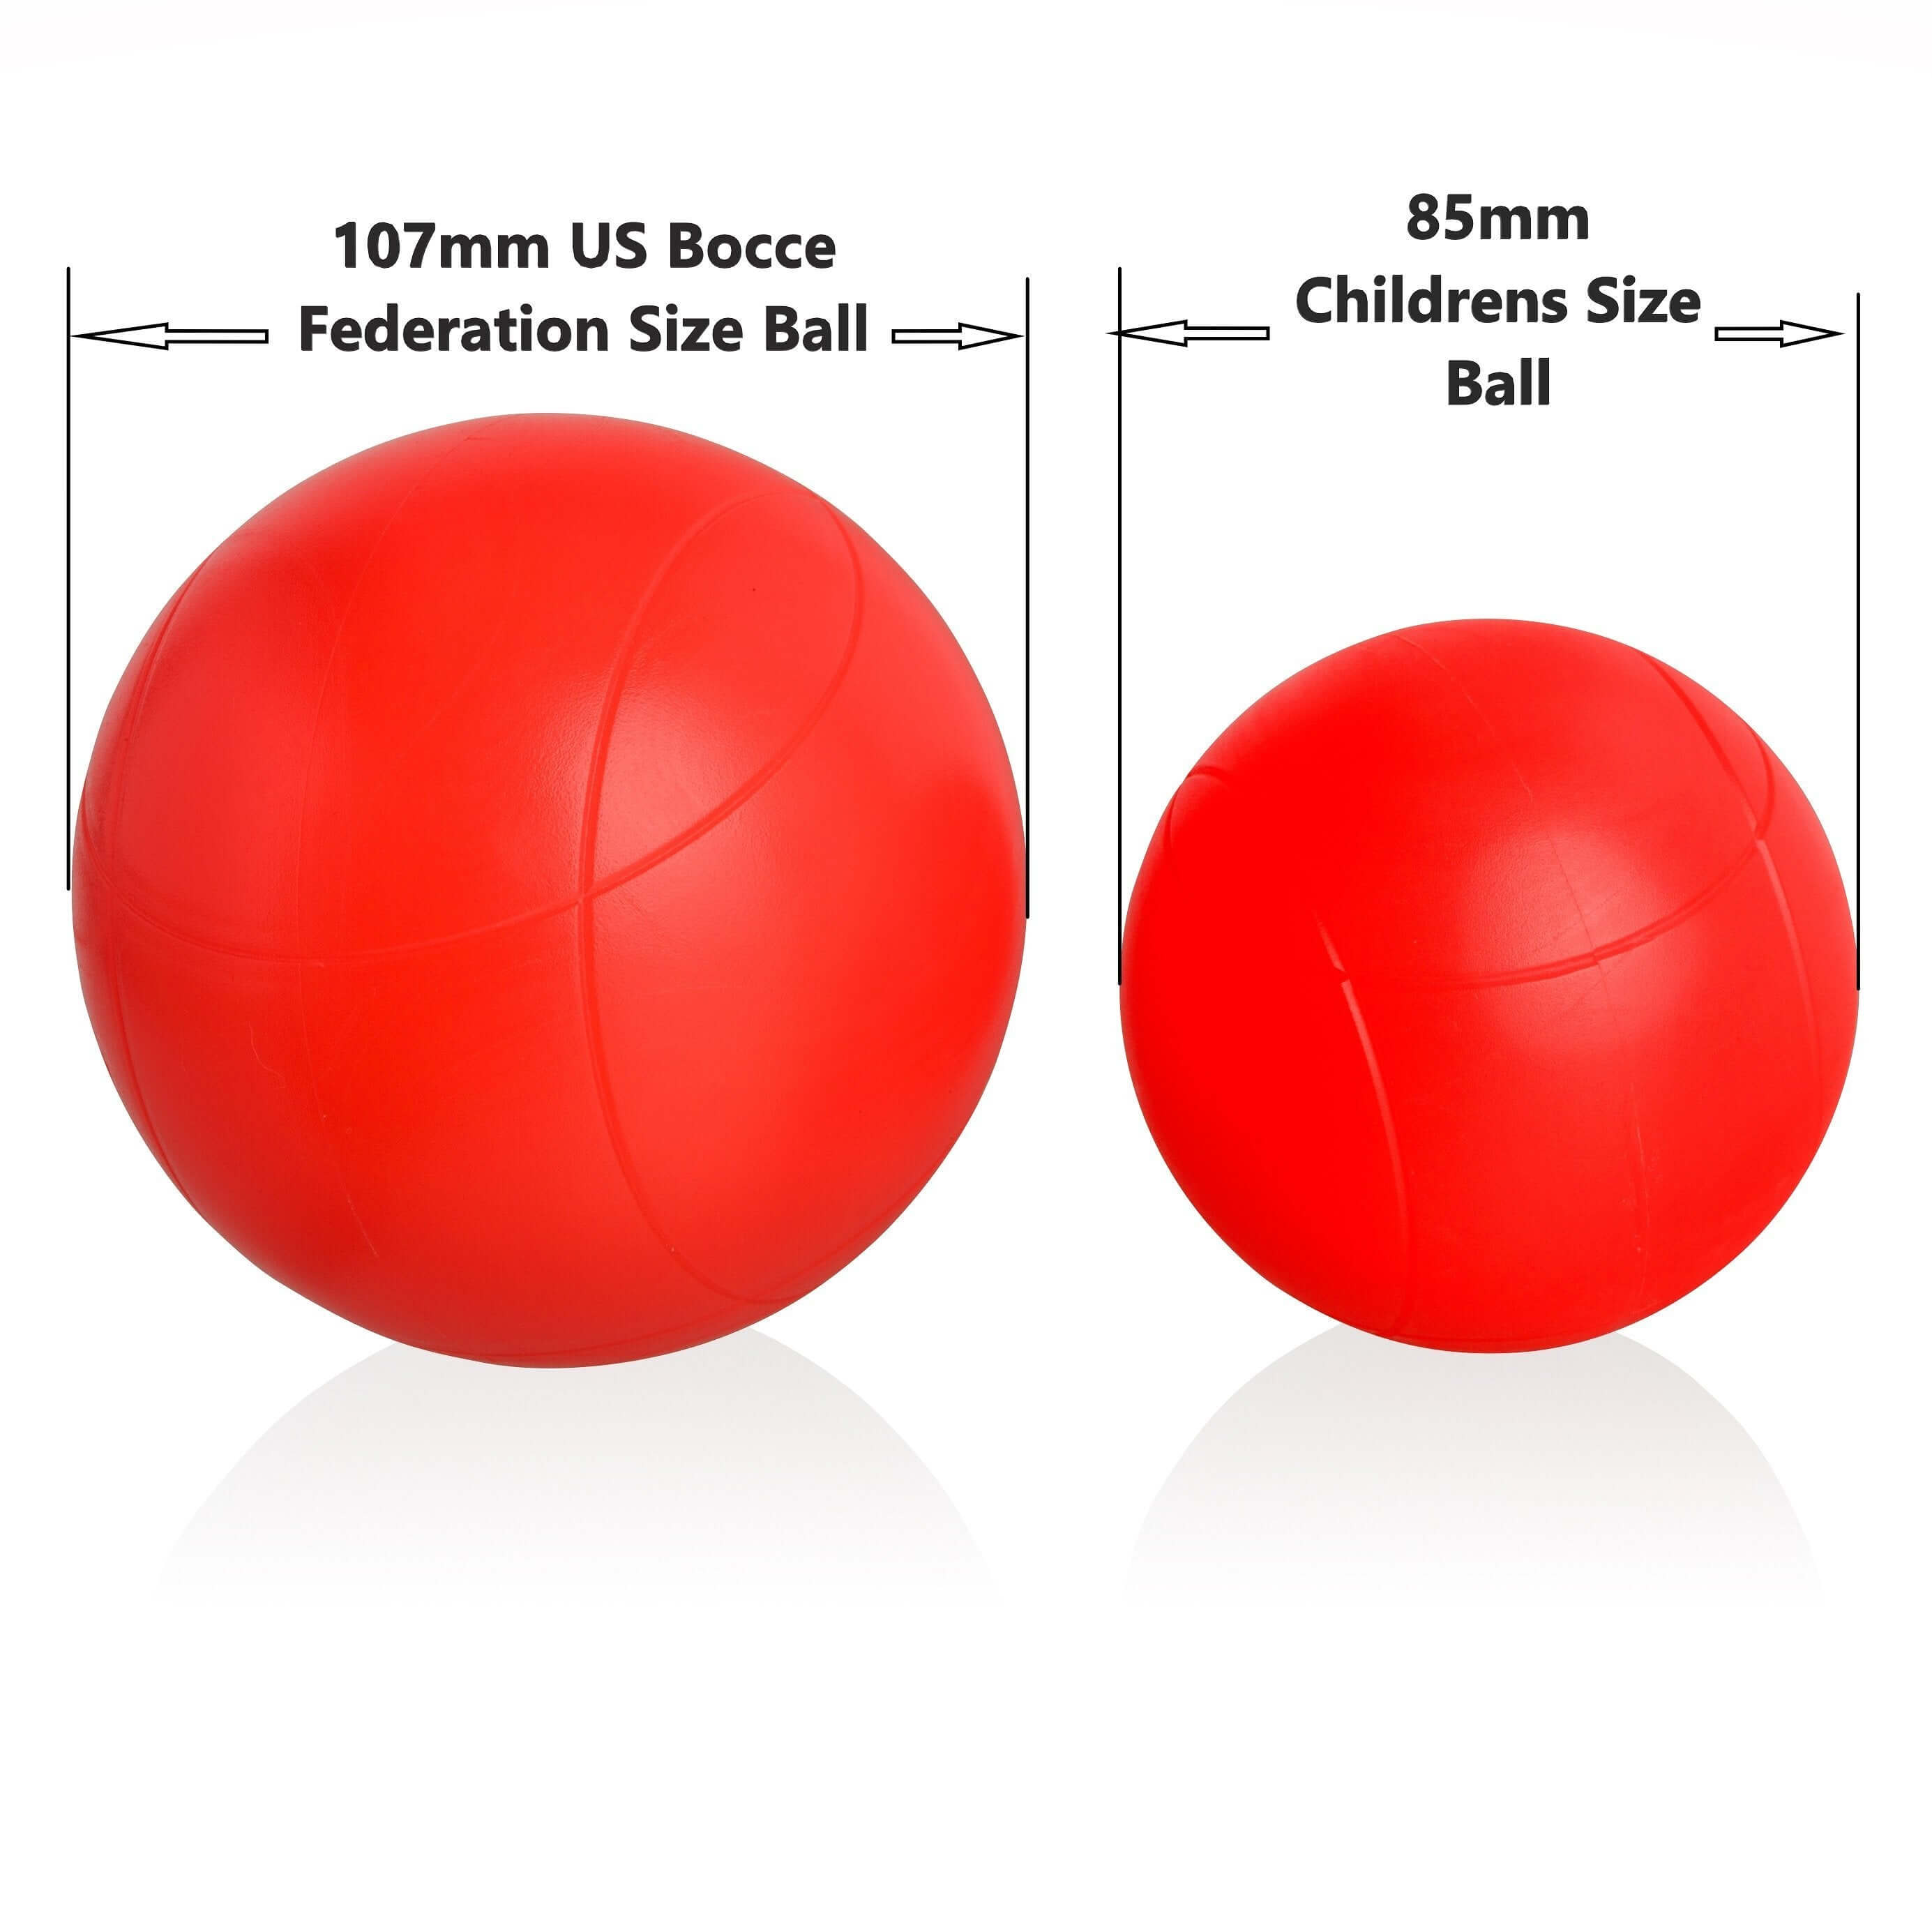 Playaboule NEW Ultimate Patented 4 Color Lighted Bocce Set 107mm Li-ion *V5* Plugs